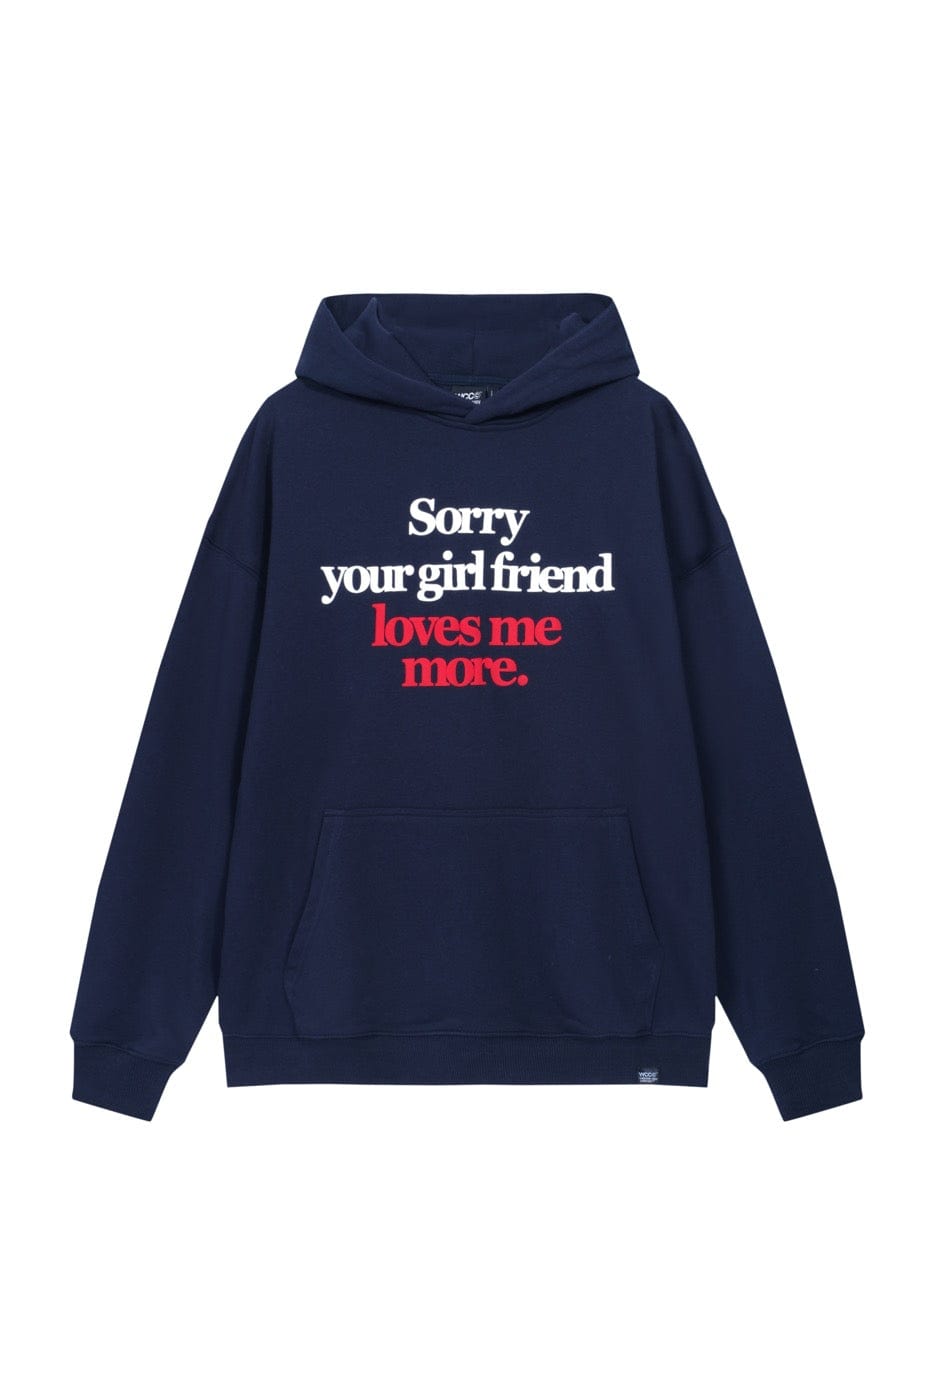 WCC Sorry Your Girlfriend Loves Me More Hoodie, premium urban and streetwear designers apparel on PROJECTISR.com, WCC